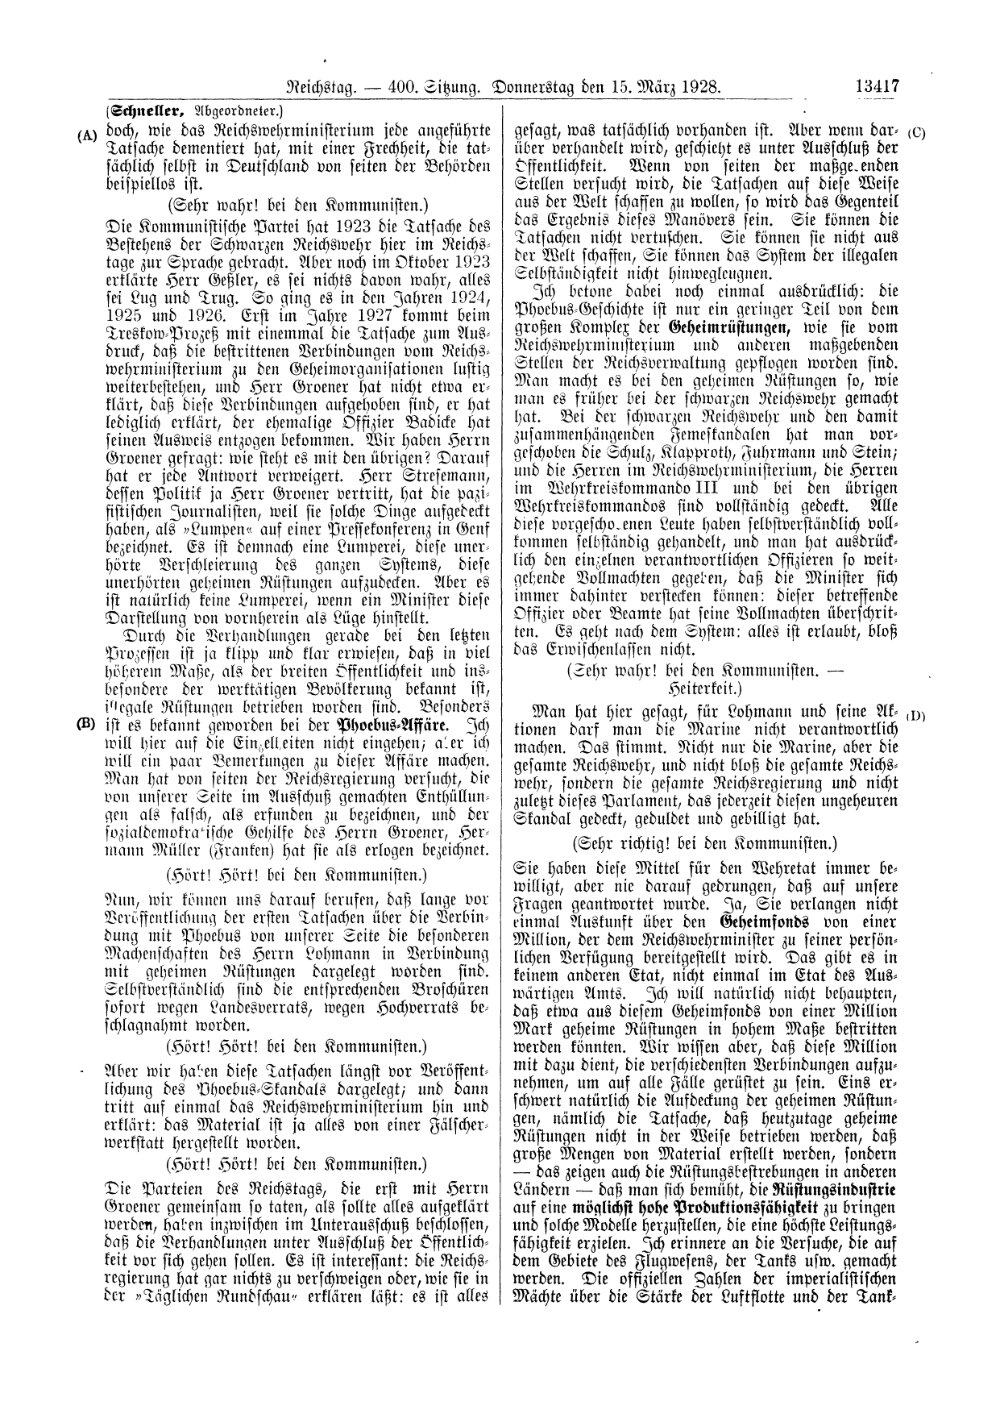 Scan of page 13417